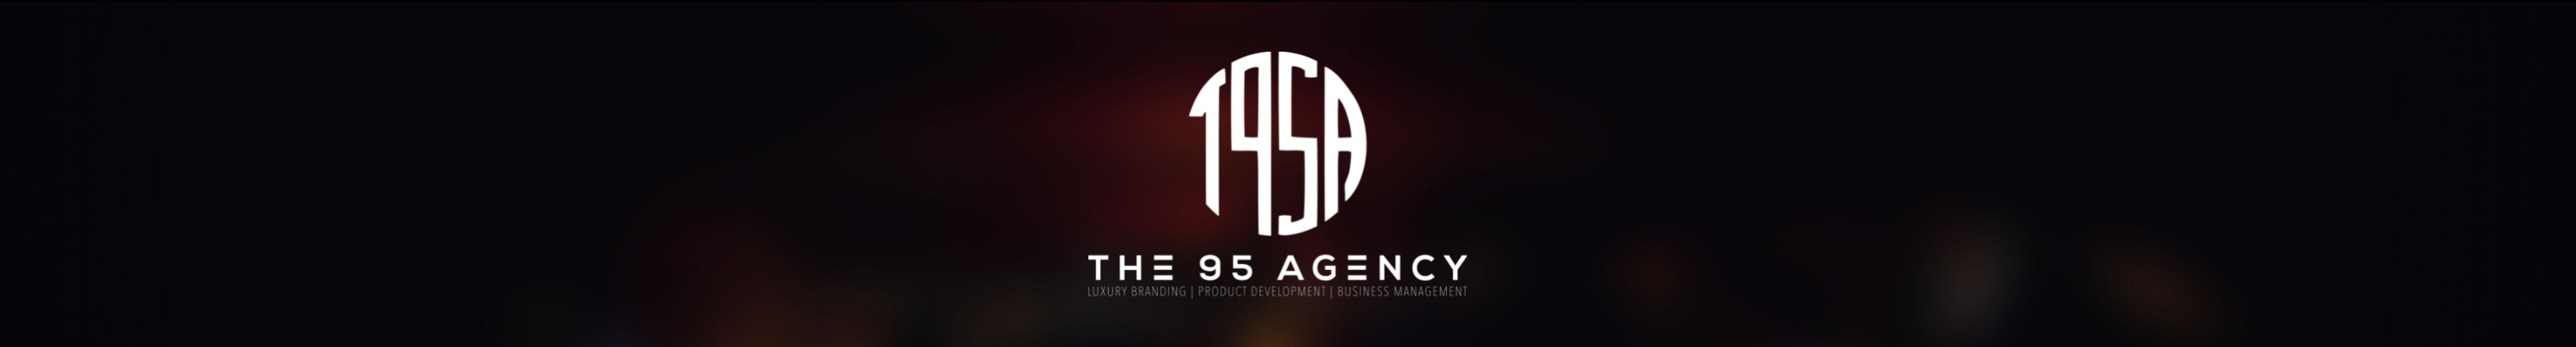 The 95 Agency's profile banner